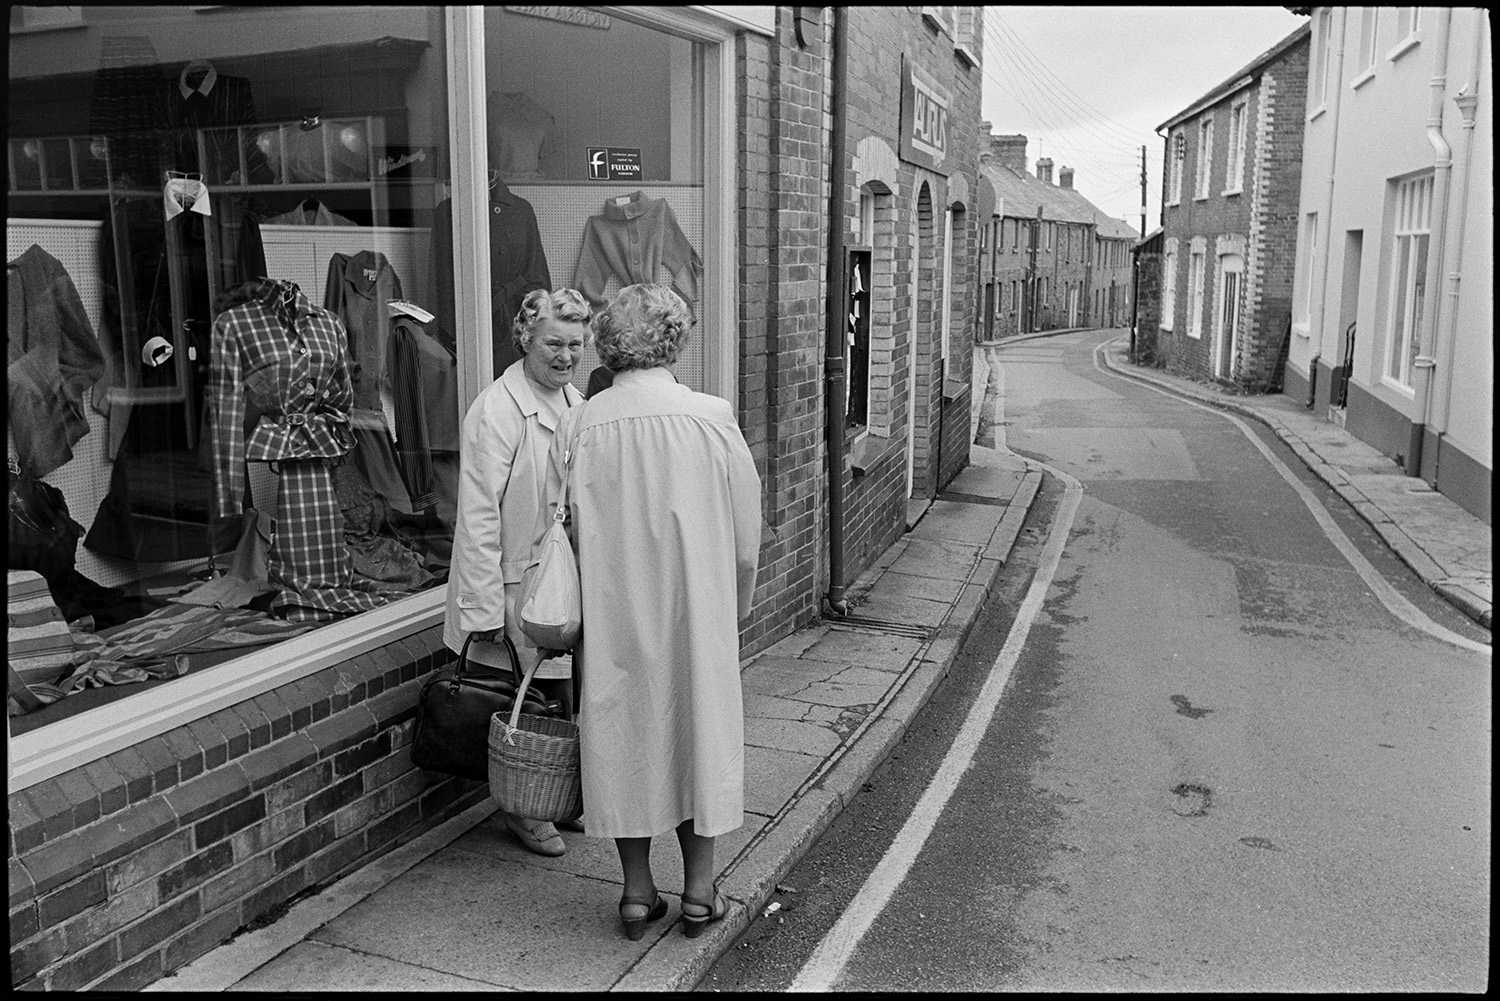 Town streets on market day clothes shop, people chatting. 
[Two women talking outside a clothes shop front window in Holsworthy. Terraced houses can be seen further along the street.]